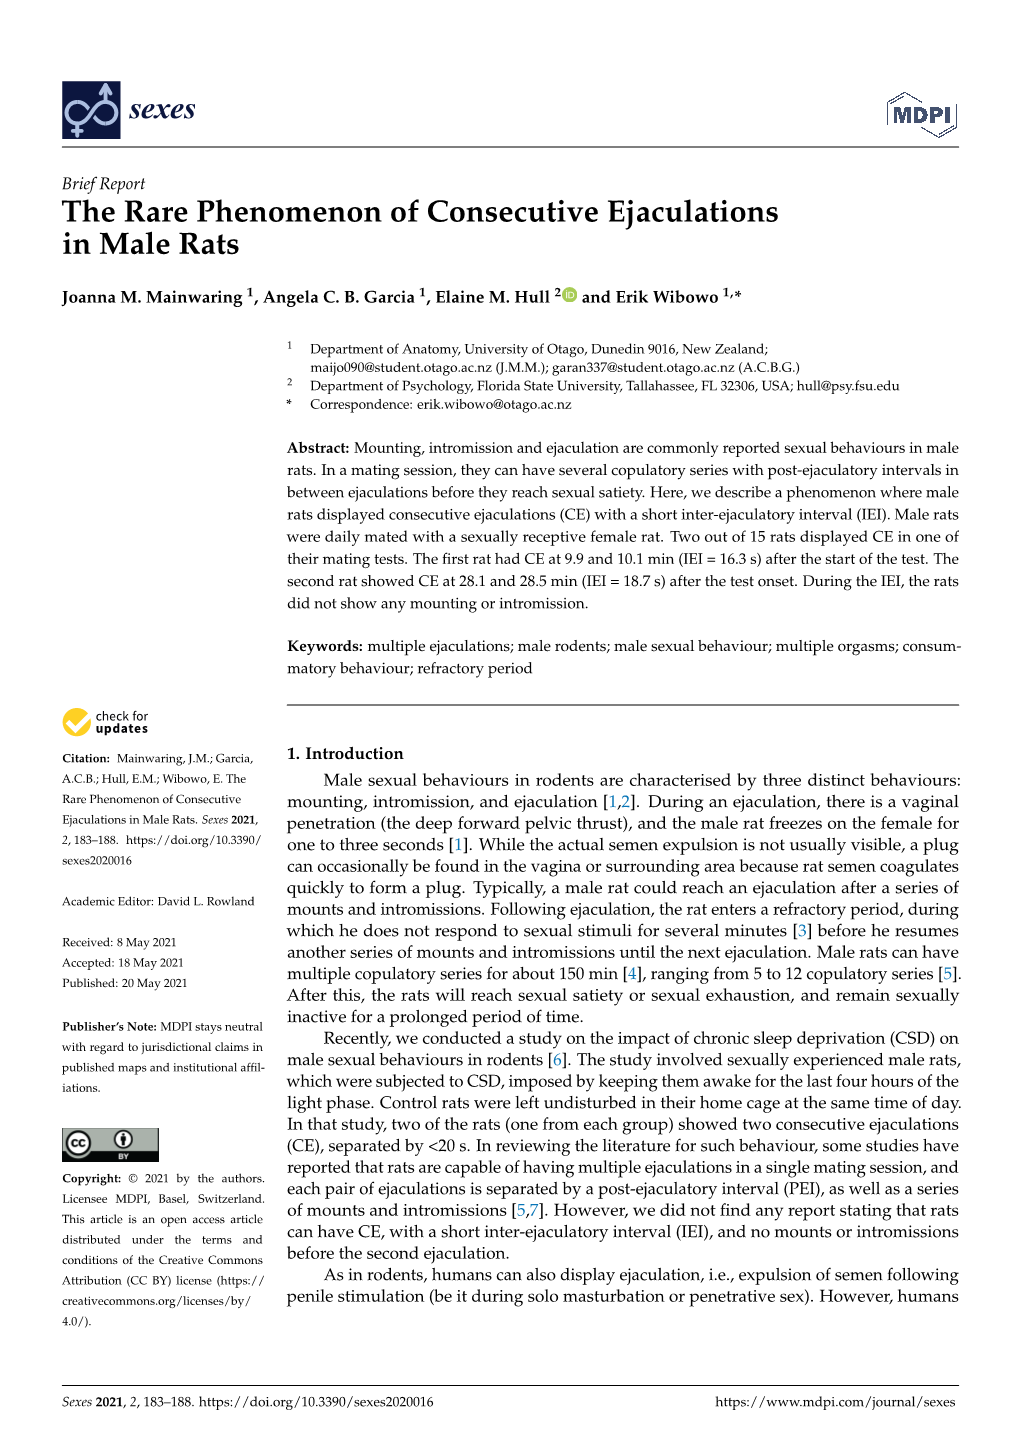 The Rare Phenomenon of Consecutive Ejaculations in Male Rats